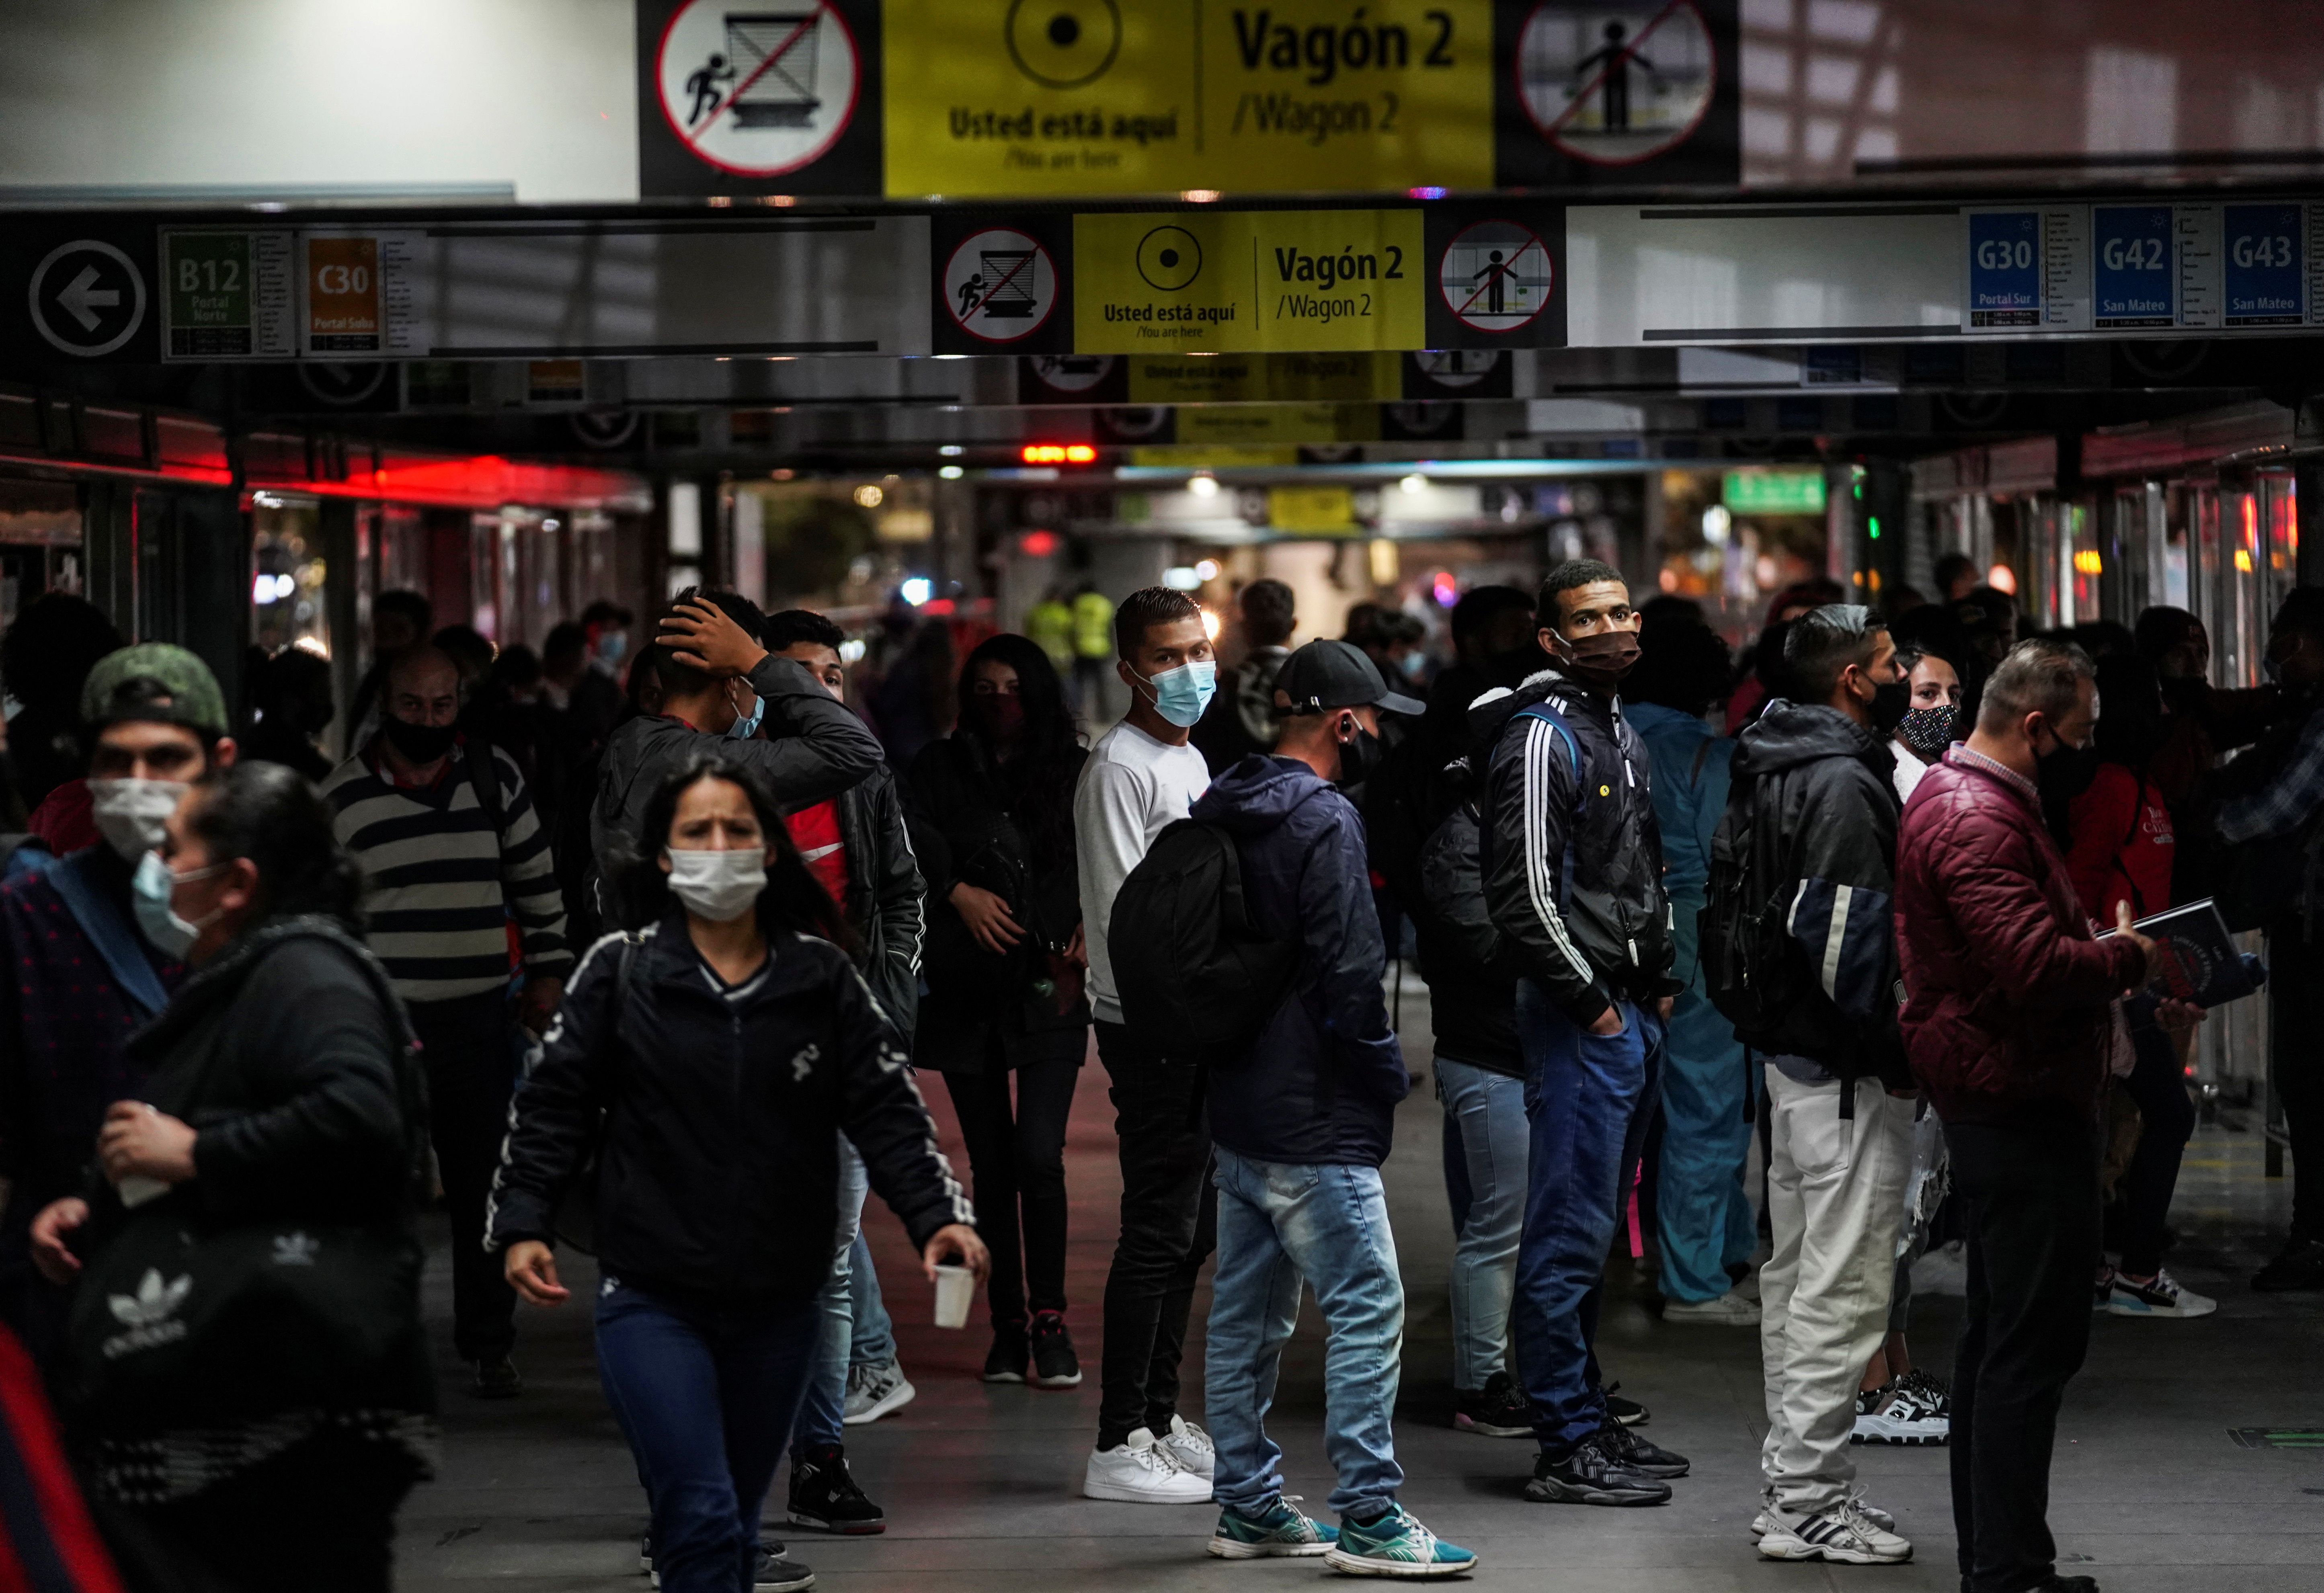 People wait to board a bus before a three-day lockdown ends on Tuesday in the capital of the country, to curb the spread of the coronavirus disease (COVID-19), in Bogota, Colombia April 12, 2021. REUTERS/Nathalia Angarita NO RESALES. NO ARCHIVES